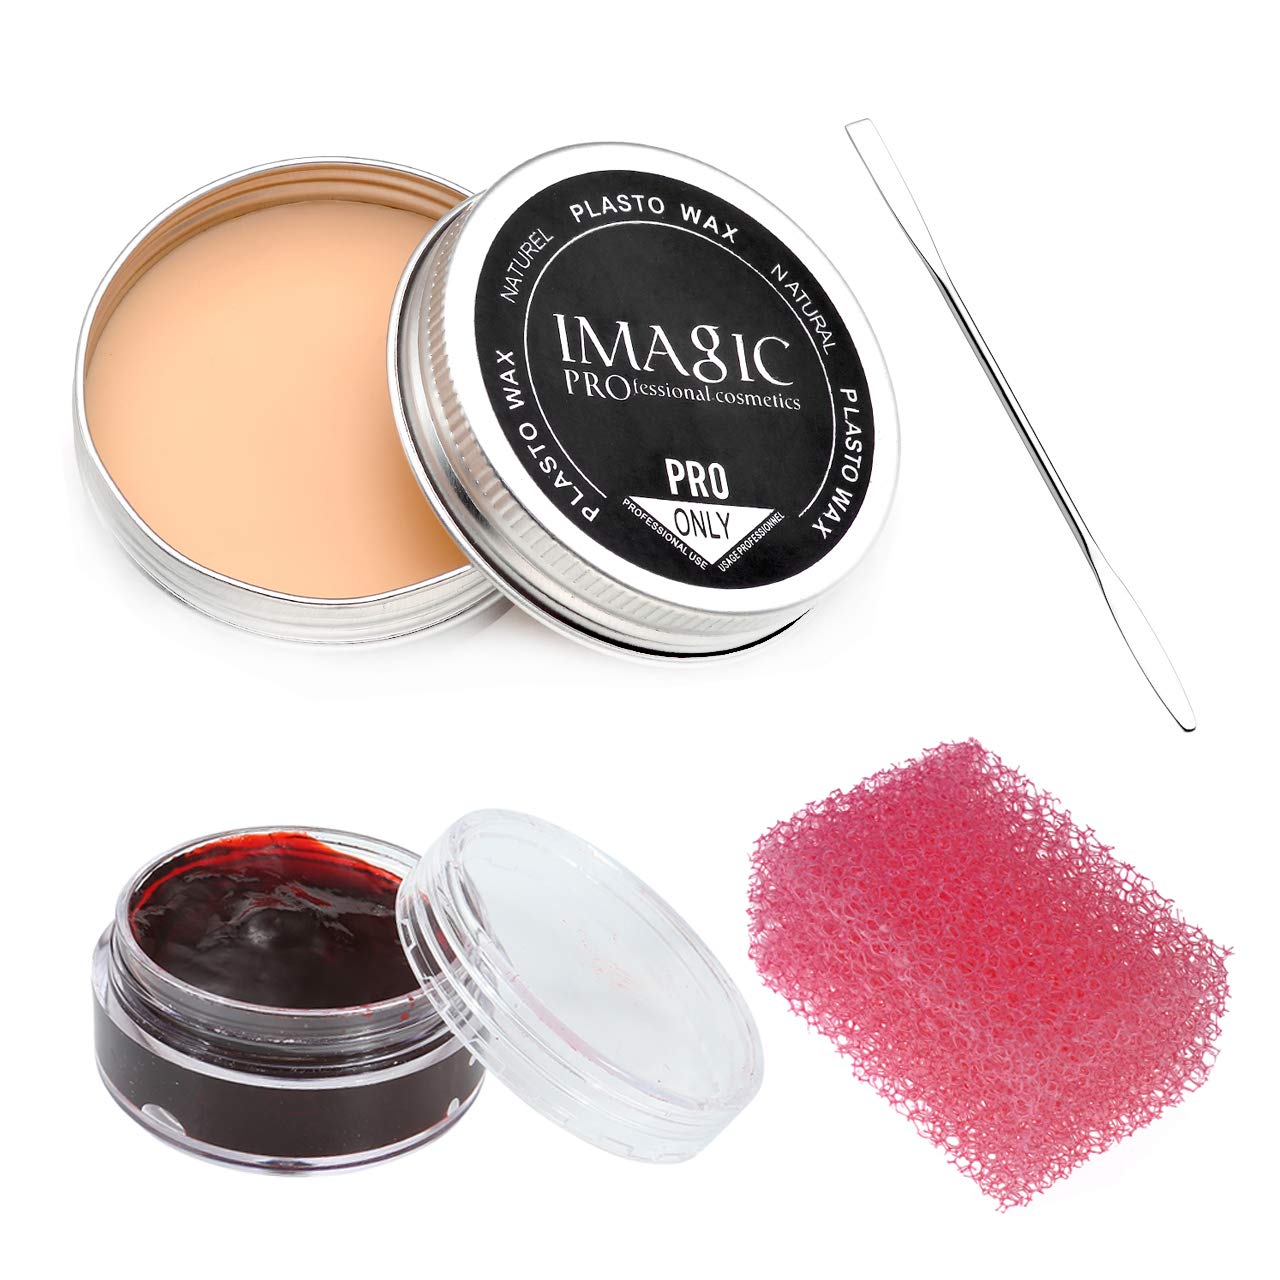 Wismee Sfx Makeup Special Effects Makeup Kit with Scar Wax (1.6 Oz